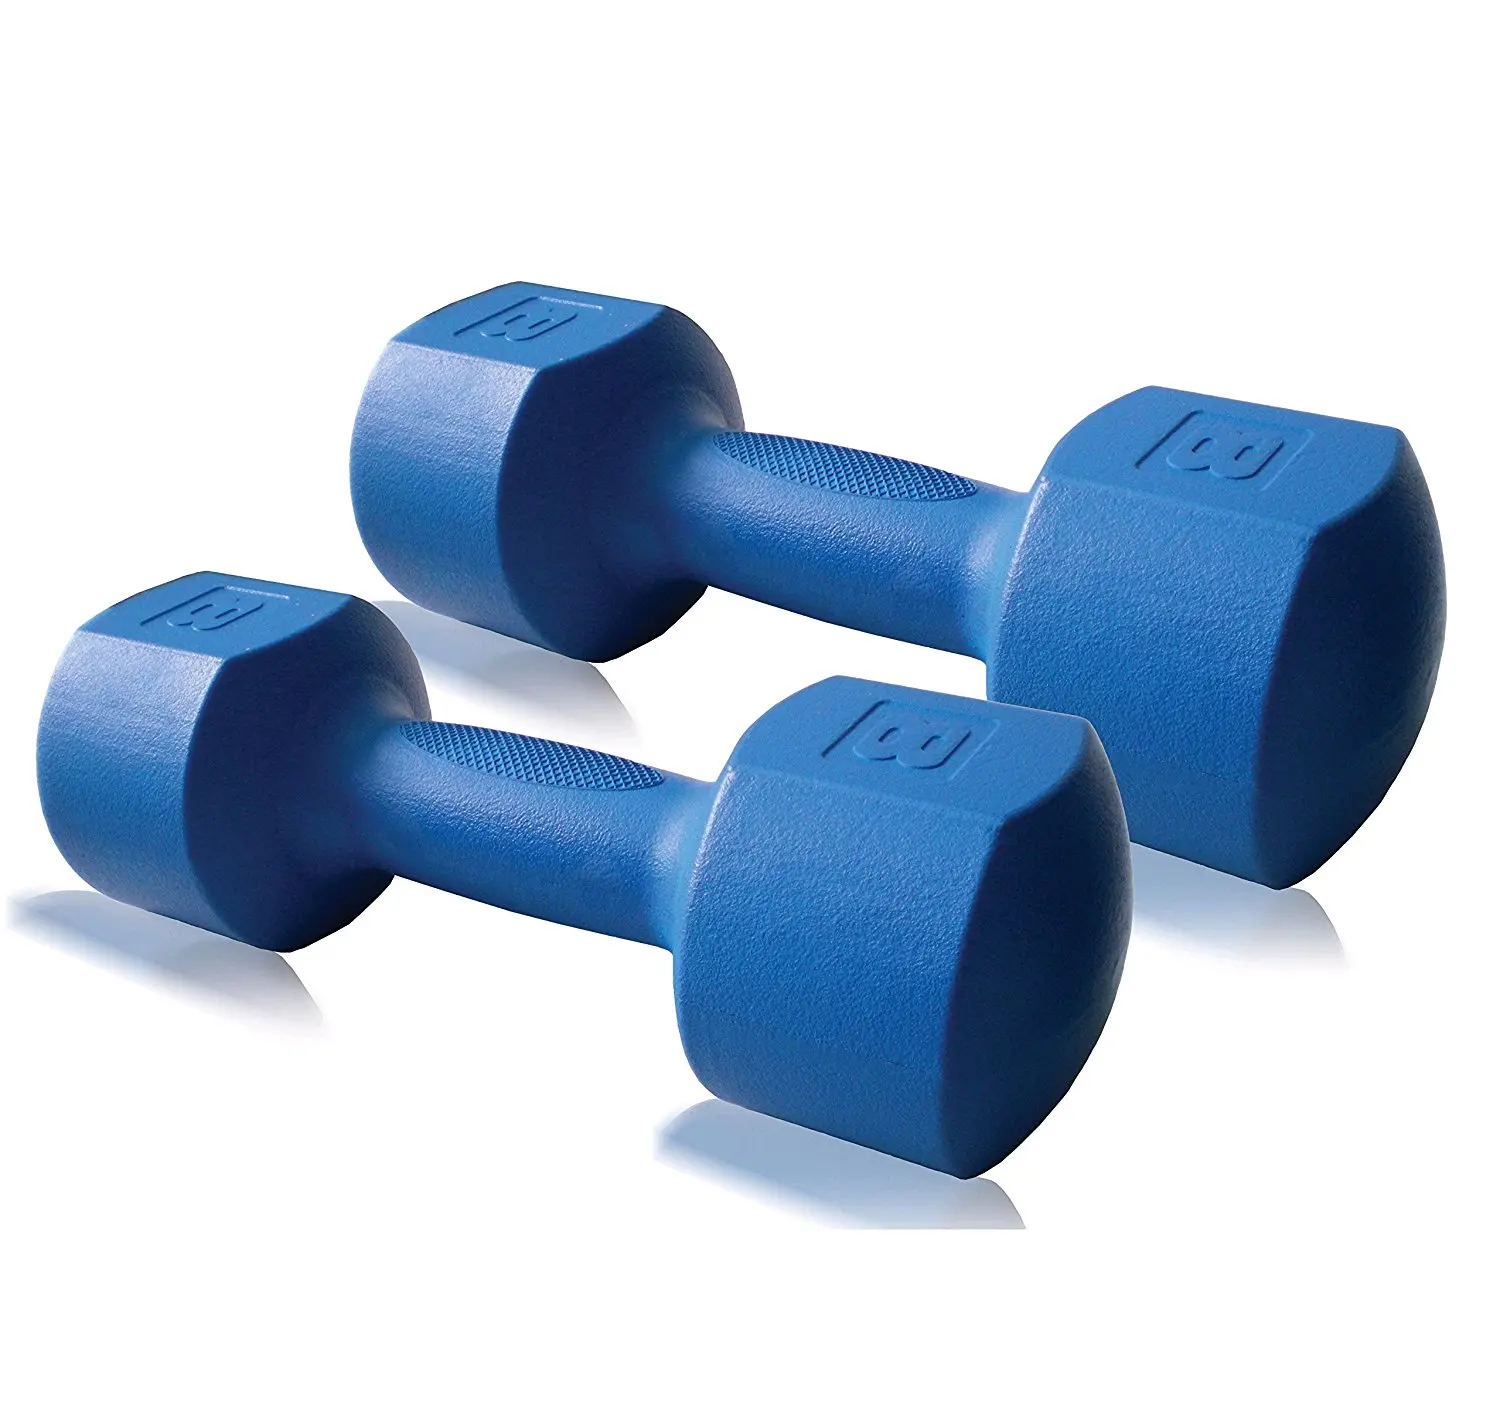 Cheap 1 Lb Dumbbell Weights, find 1 Lb Dumbbell Weights deals on line ...